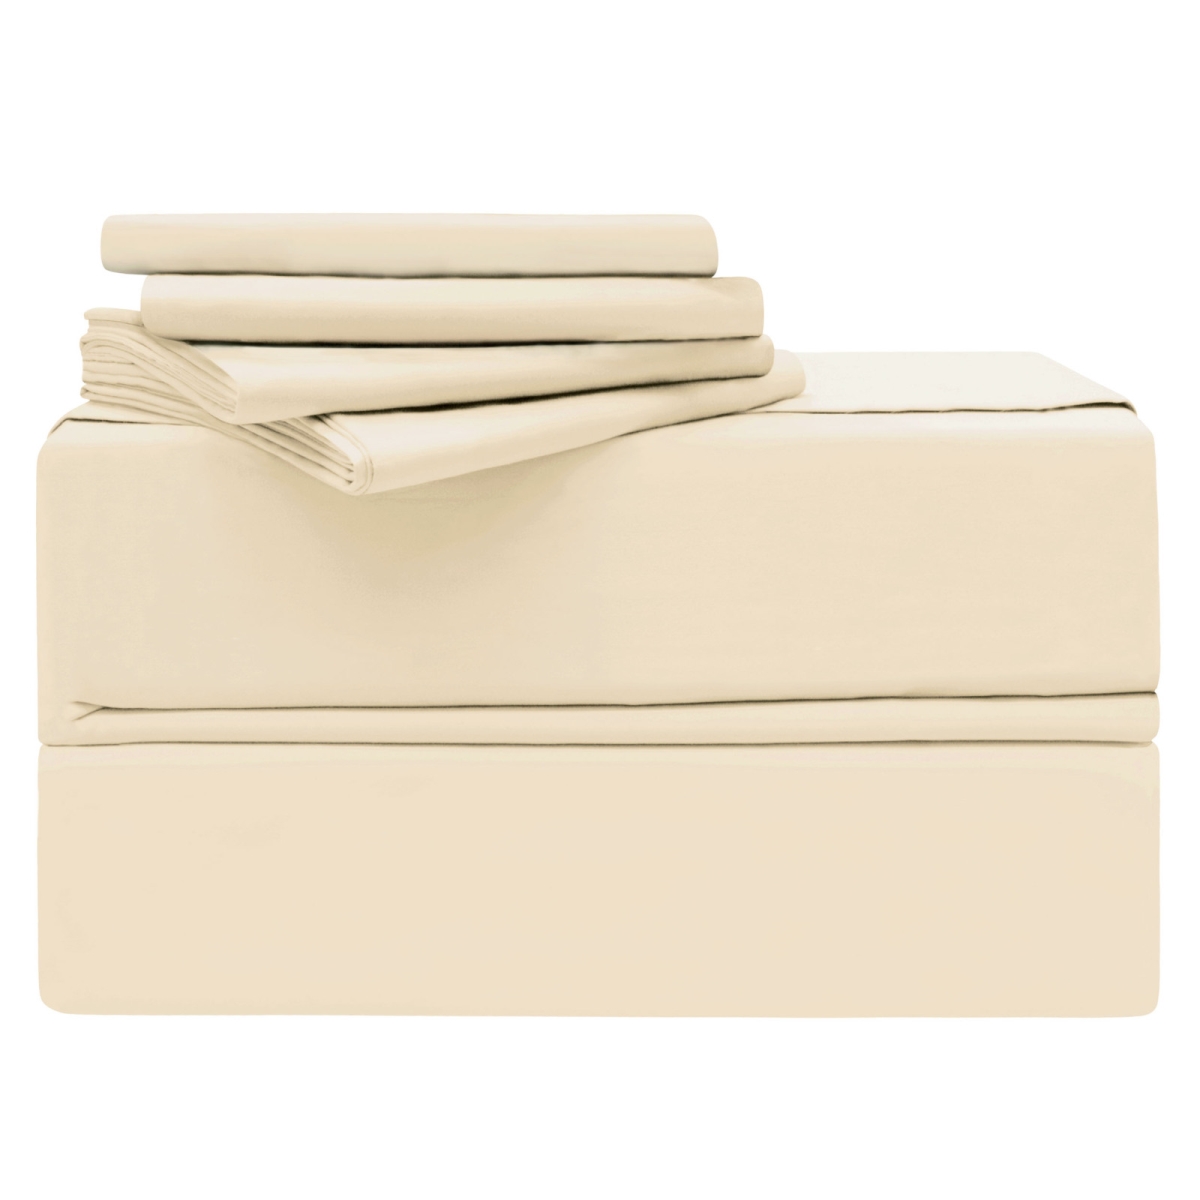 Yms008196 Luxury 620 Thread Count 100 Percent Cotton Sheet Set, Ivory - King - 6 Piece